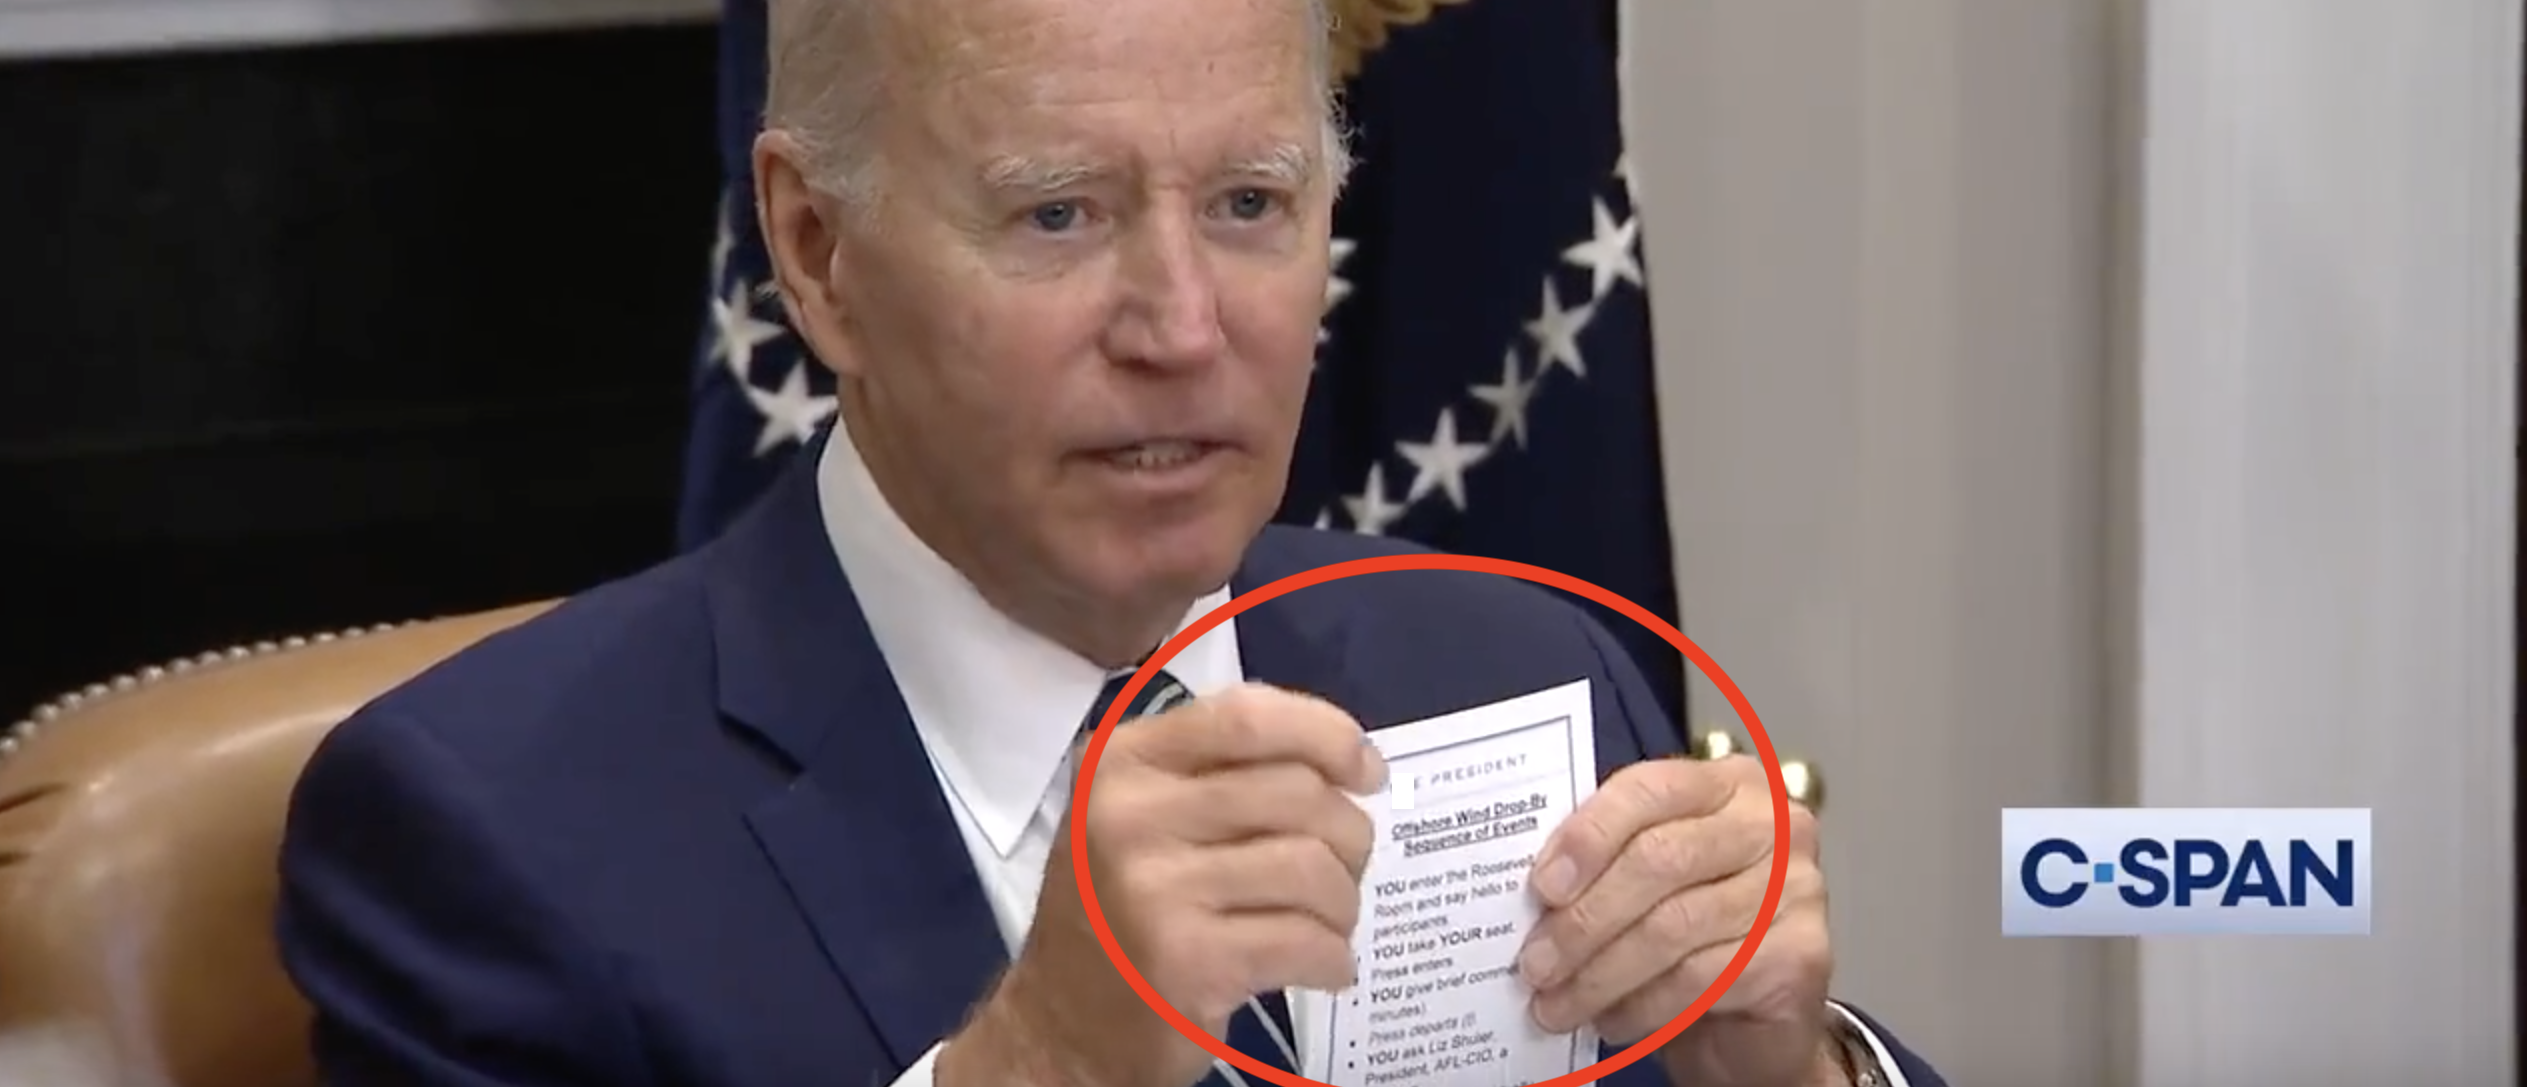 We Almost Can’t Believe These Biden Notes For A White House Event Are Real, But They Are